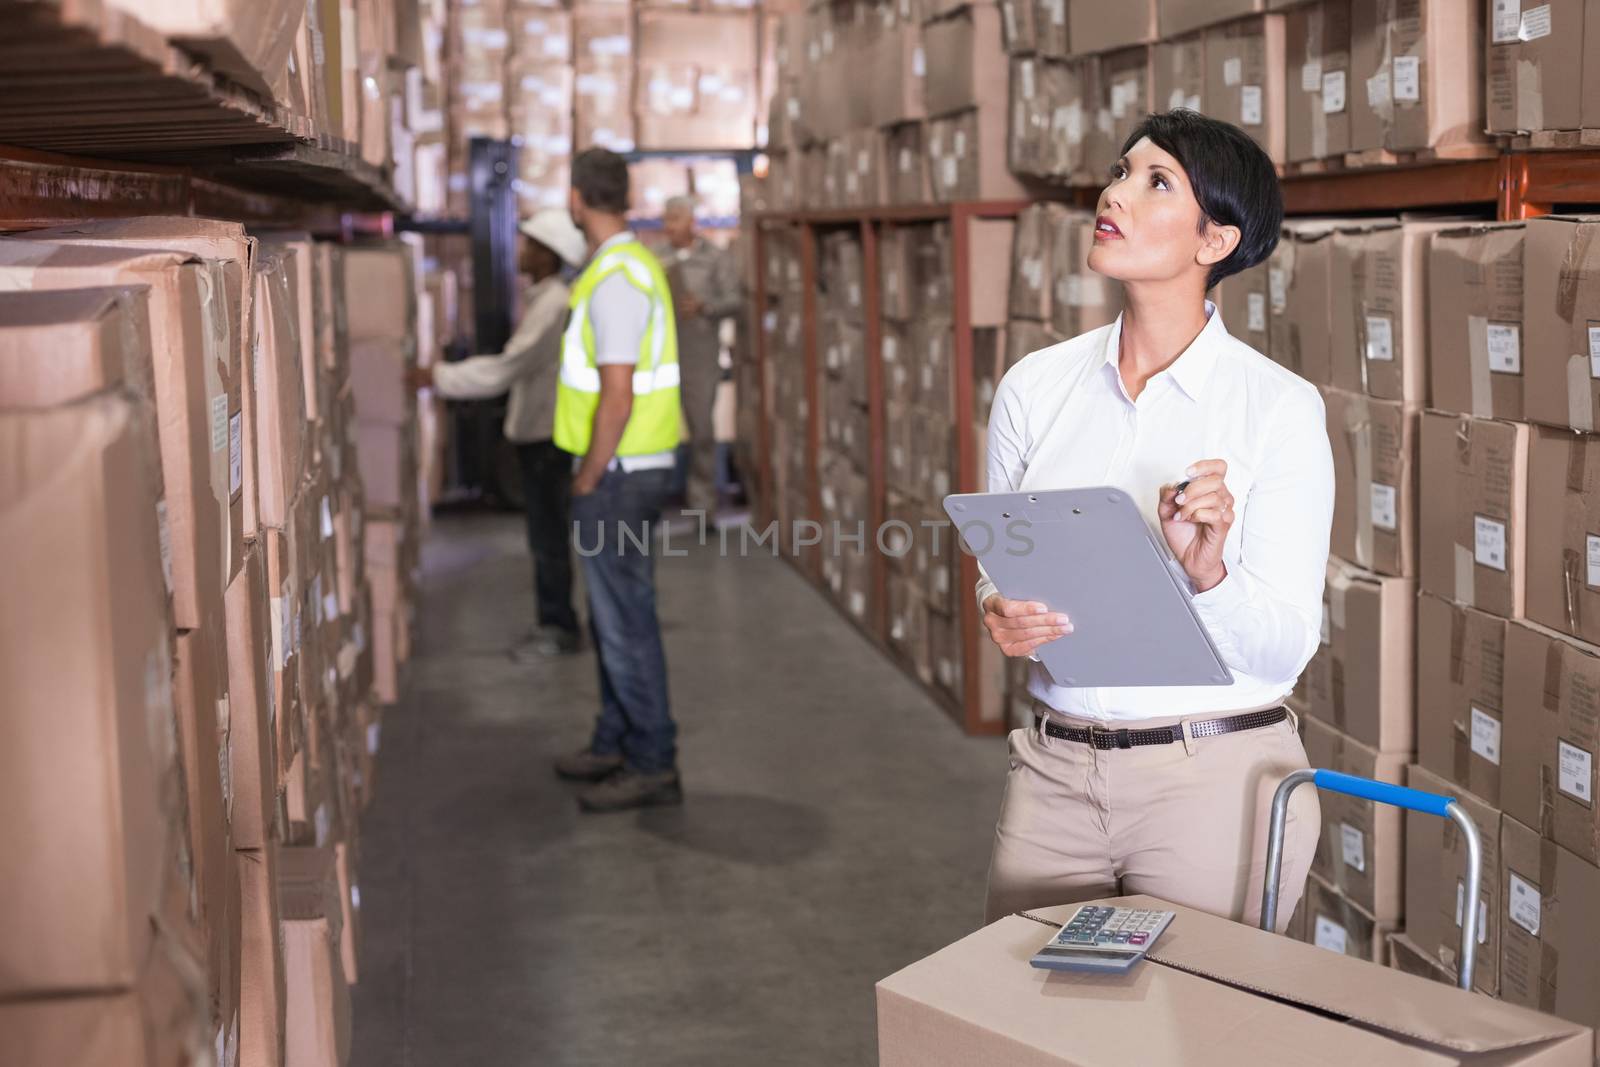 Pretty warehouse manager checking inventory in a large warehouse